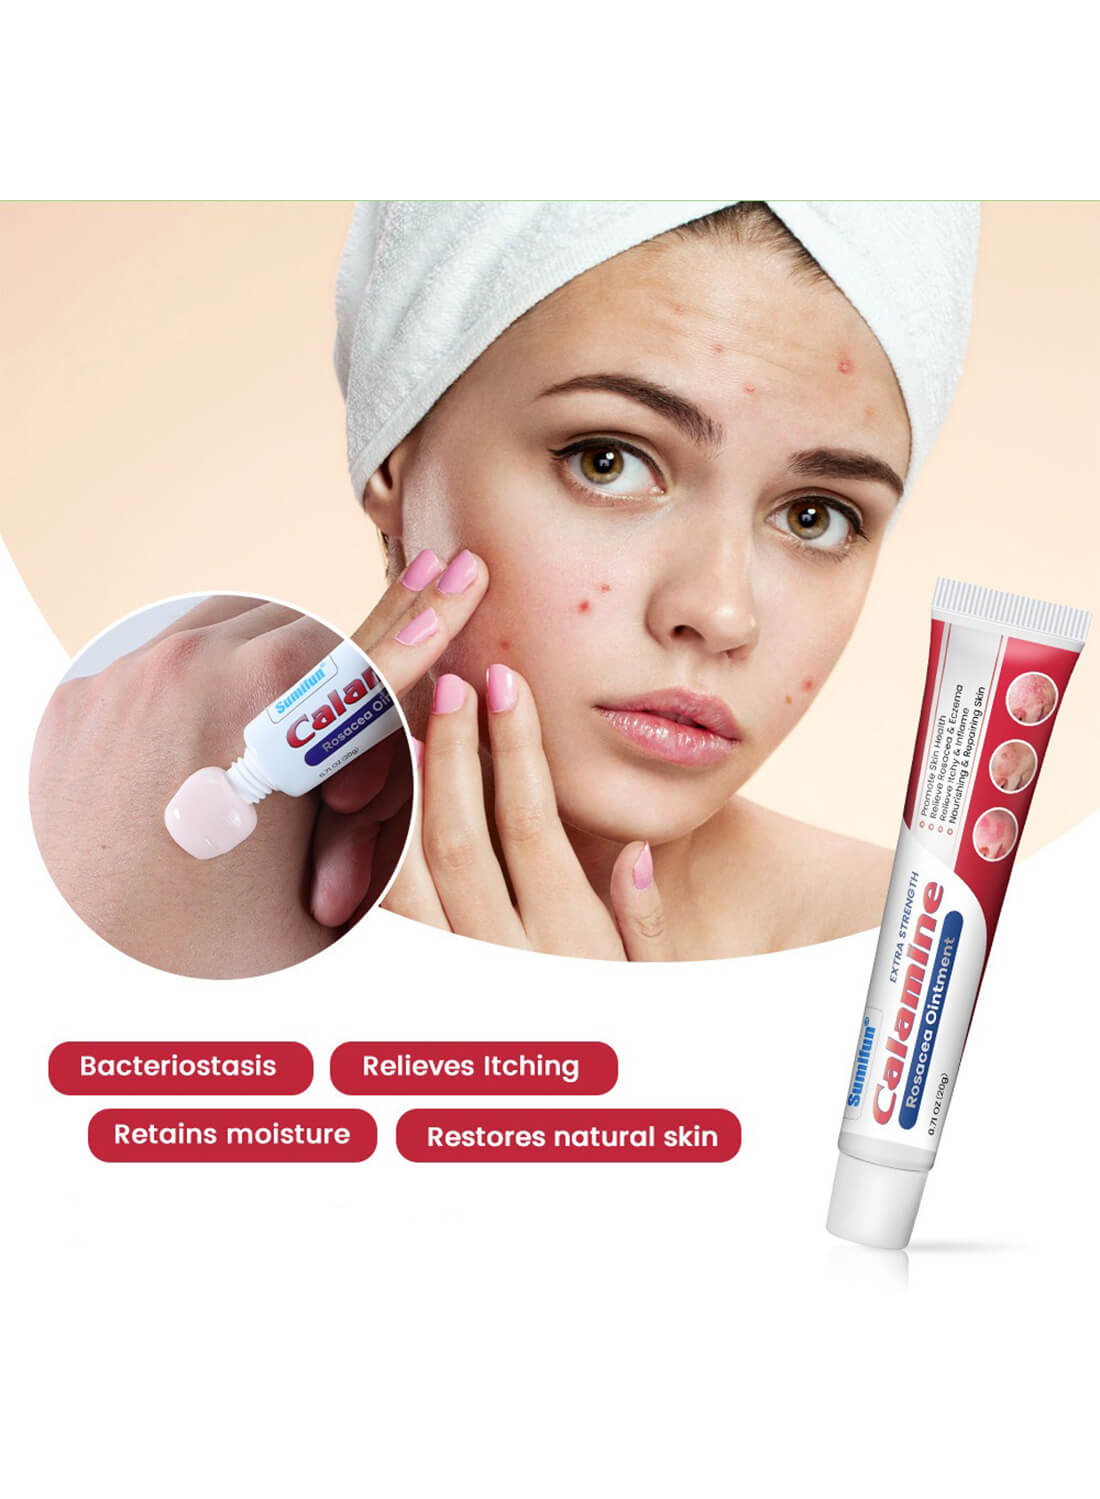 Calamine Rosacea Ointment, Effective Relieve Rosacea and Eczema 20g